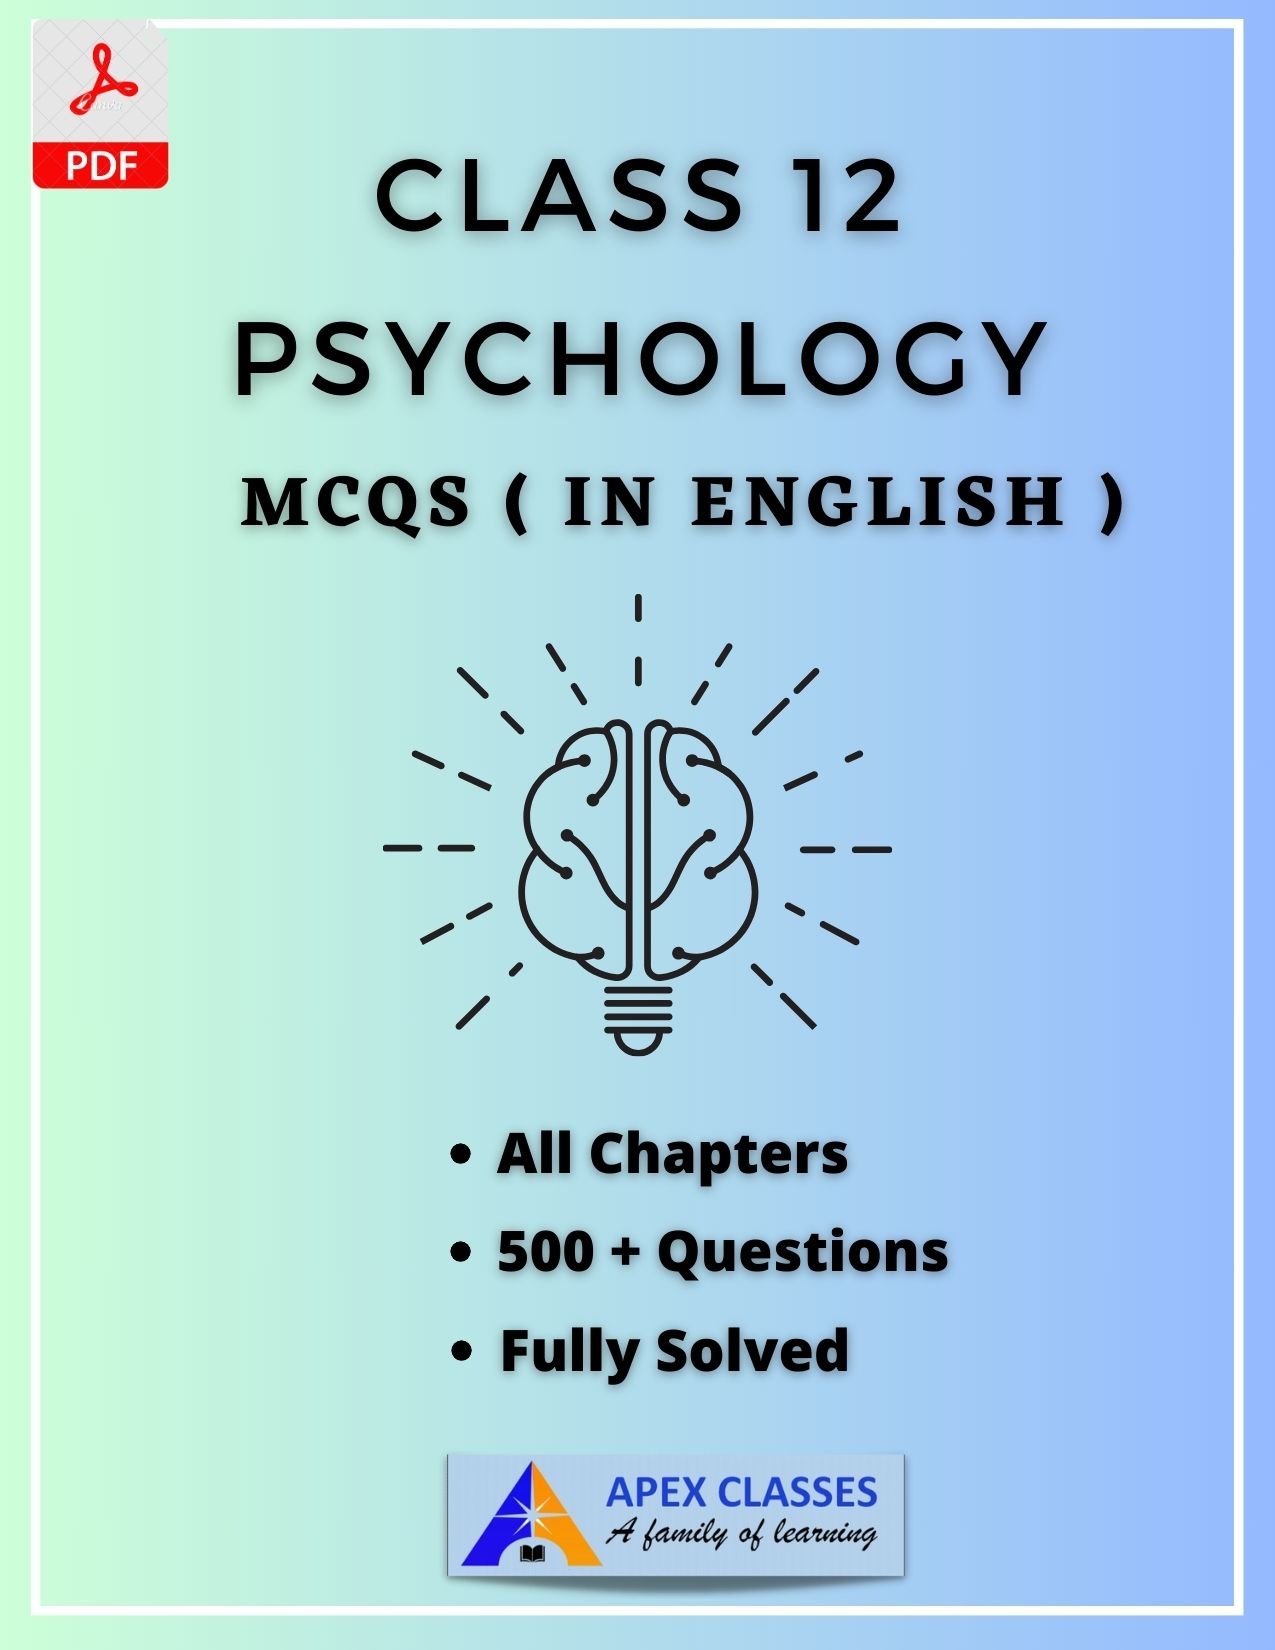 NCERT Class 12 Psychology MCQs all Chapters in English